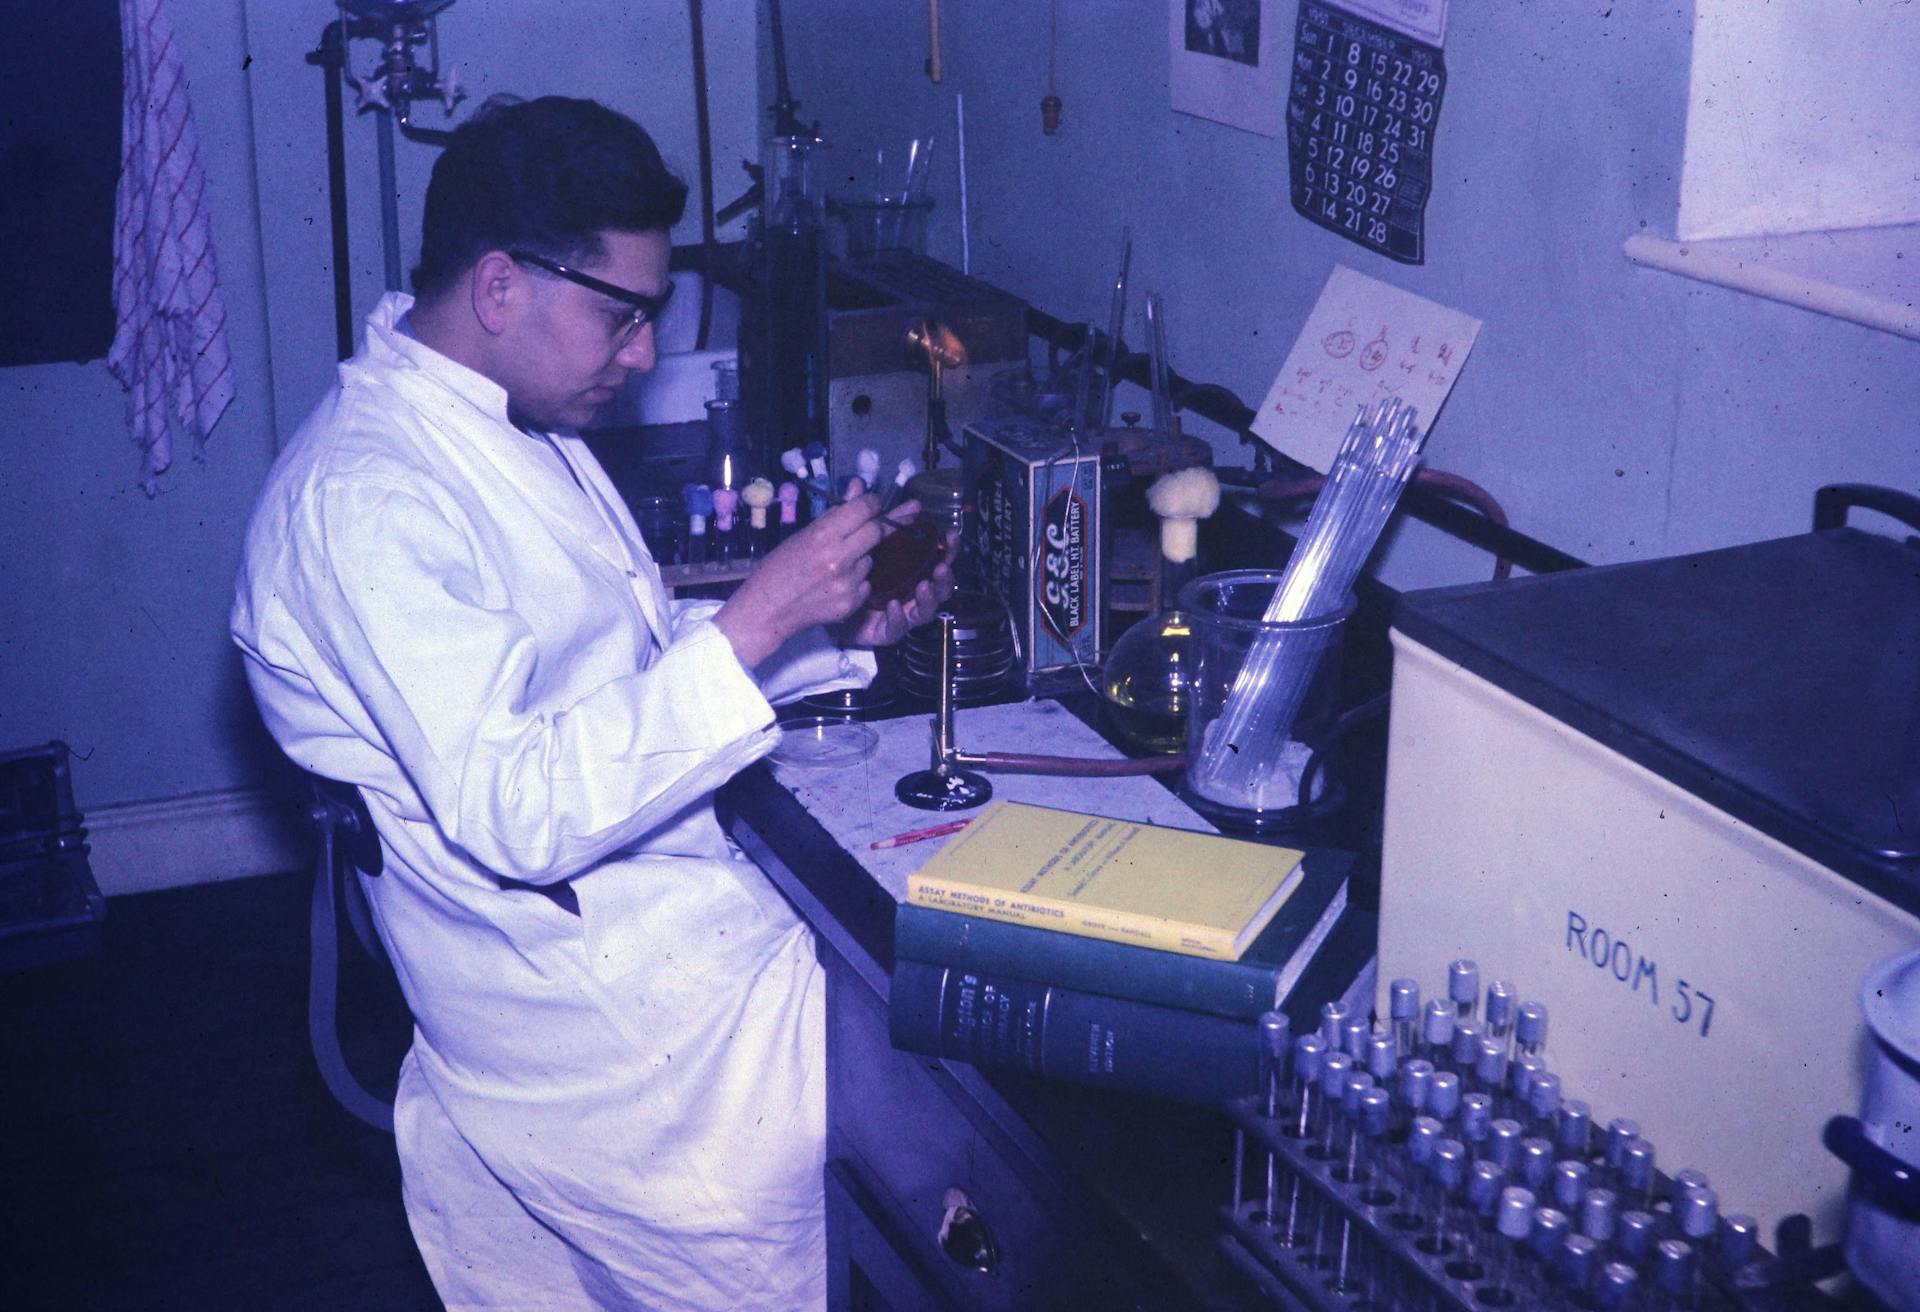 Sehgal in his lab at the National Research Council of Canada, Ottawa, circa 1959. Credit: Courtesy Sehgal Family